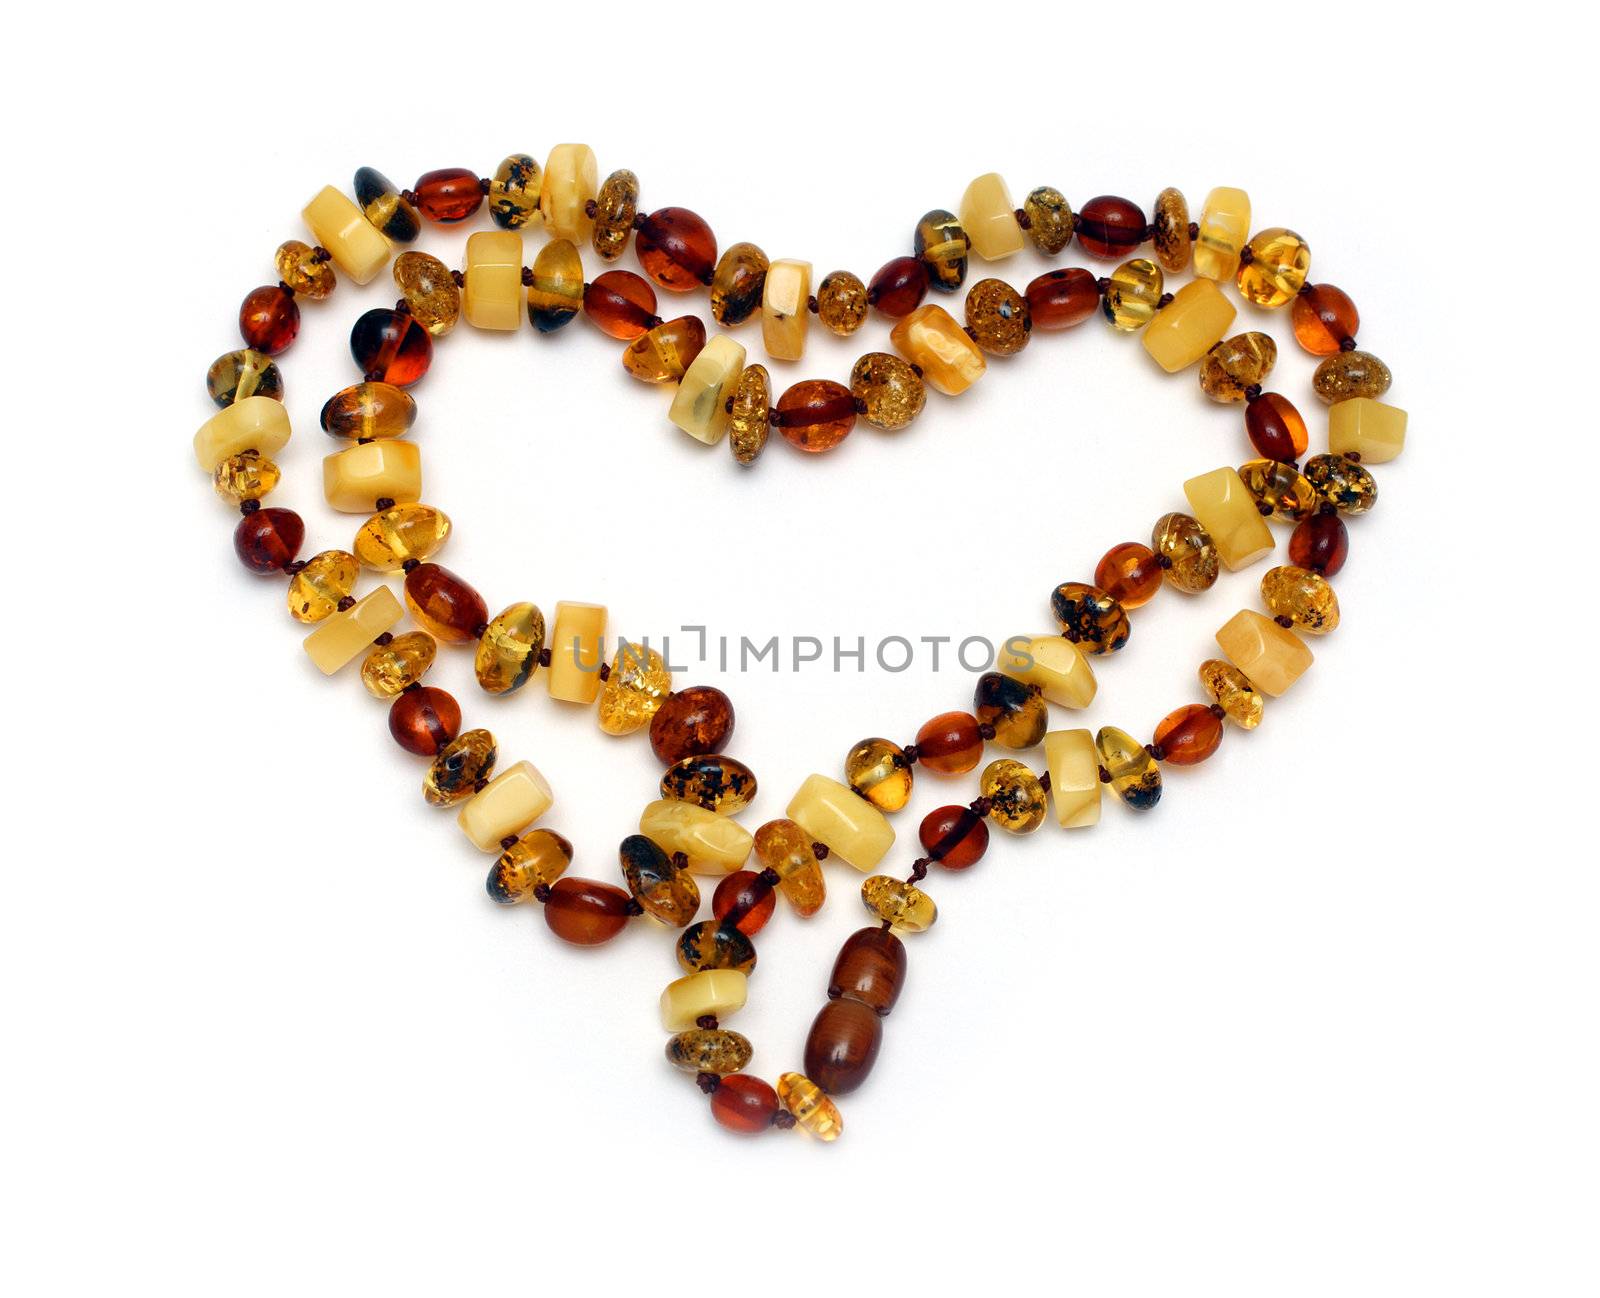 heart shape from amber necklace isolated on white